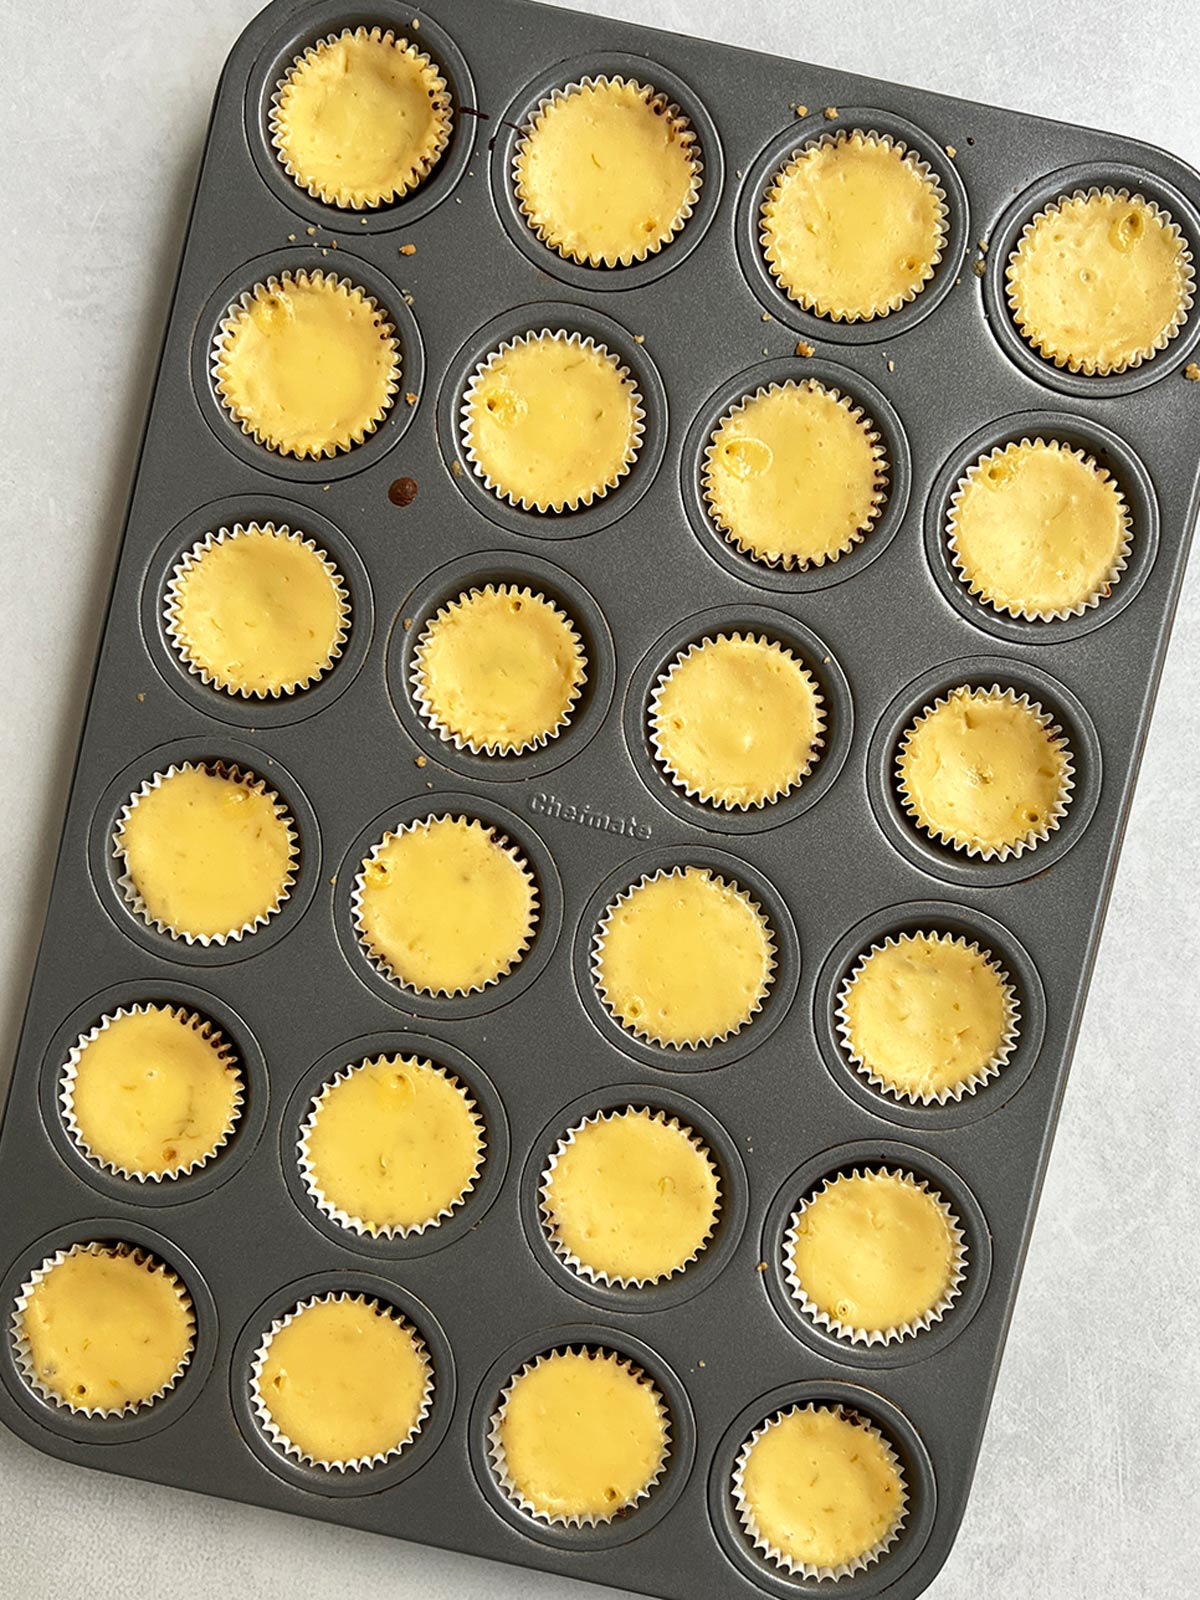 Mini key lime pie bites baked and still in cupcake pan.